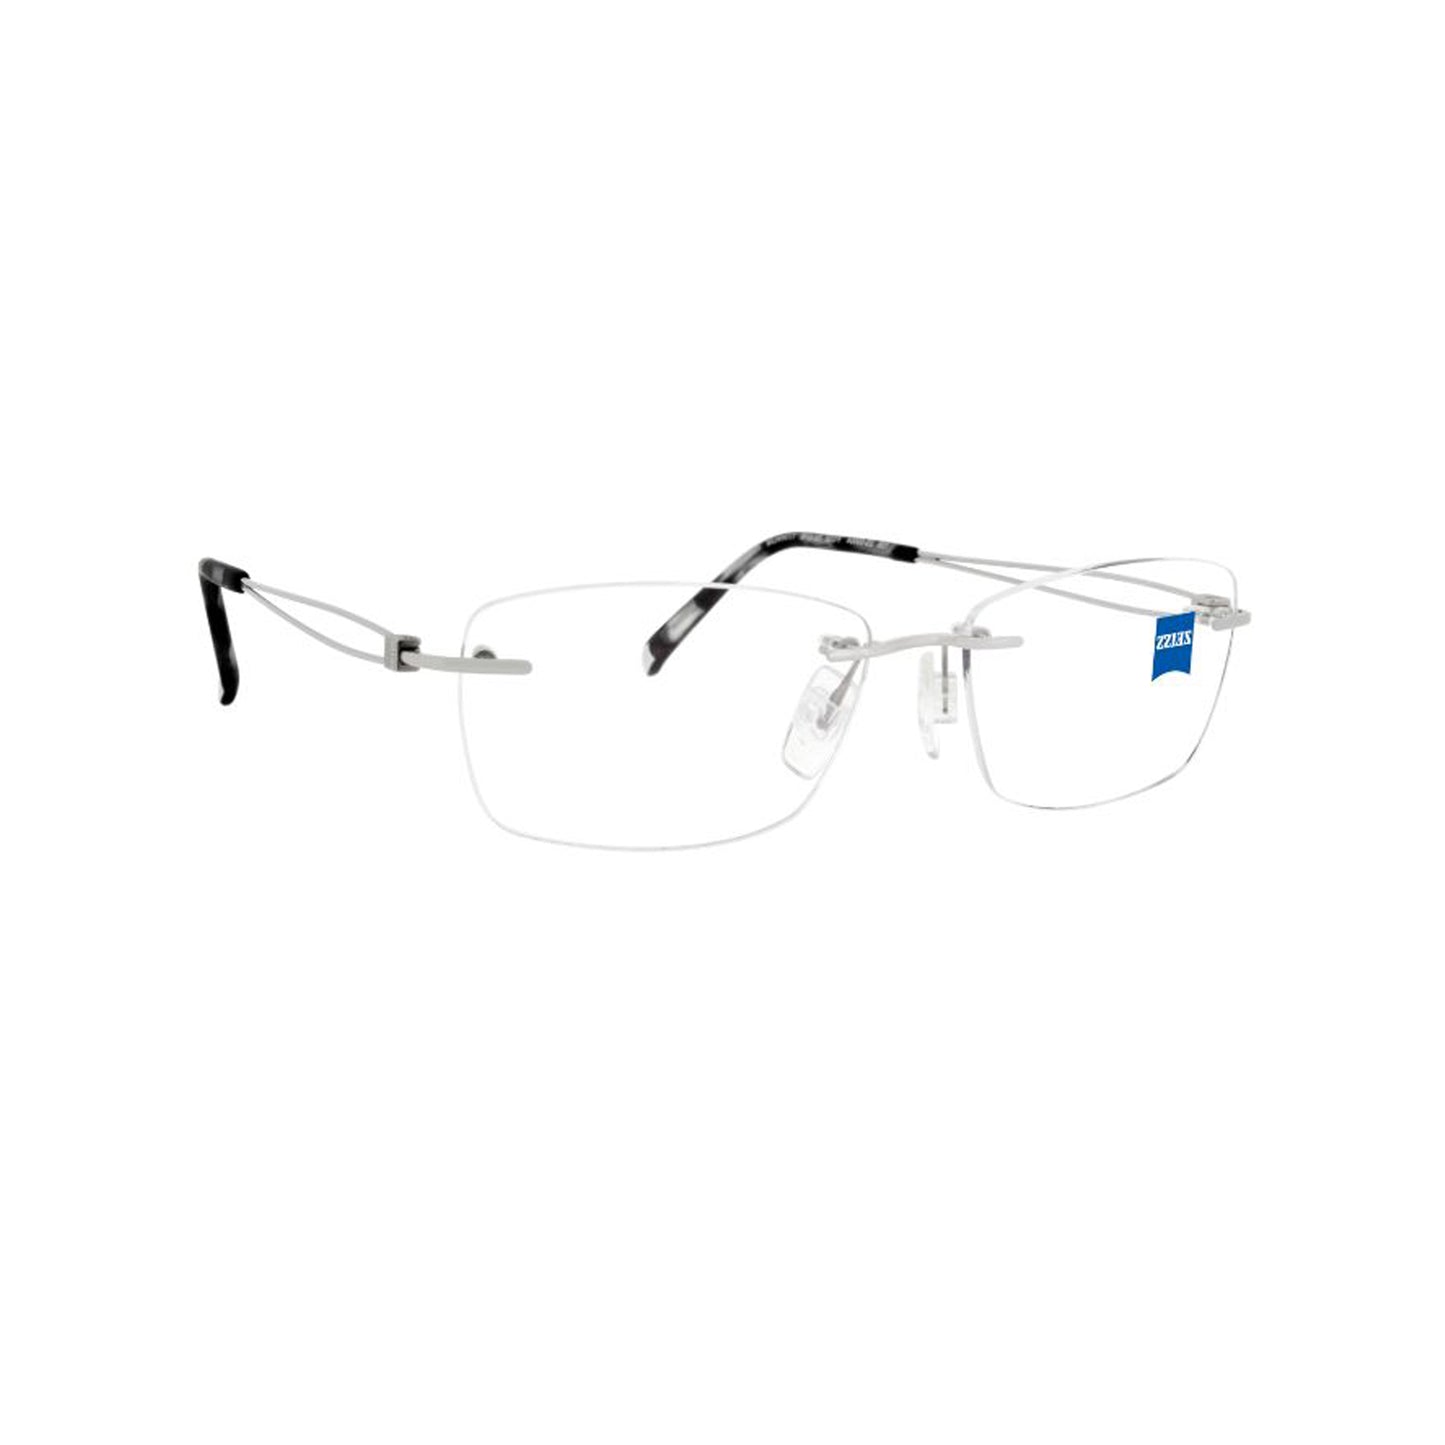 Zeiss Eyewear Silver Rectangle Metal Rimless Eyeglasses. Made in Germany ZS50004-Y22